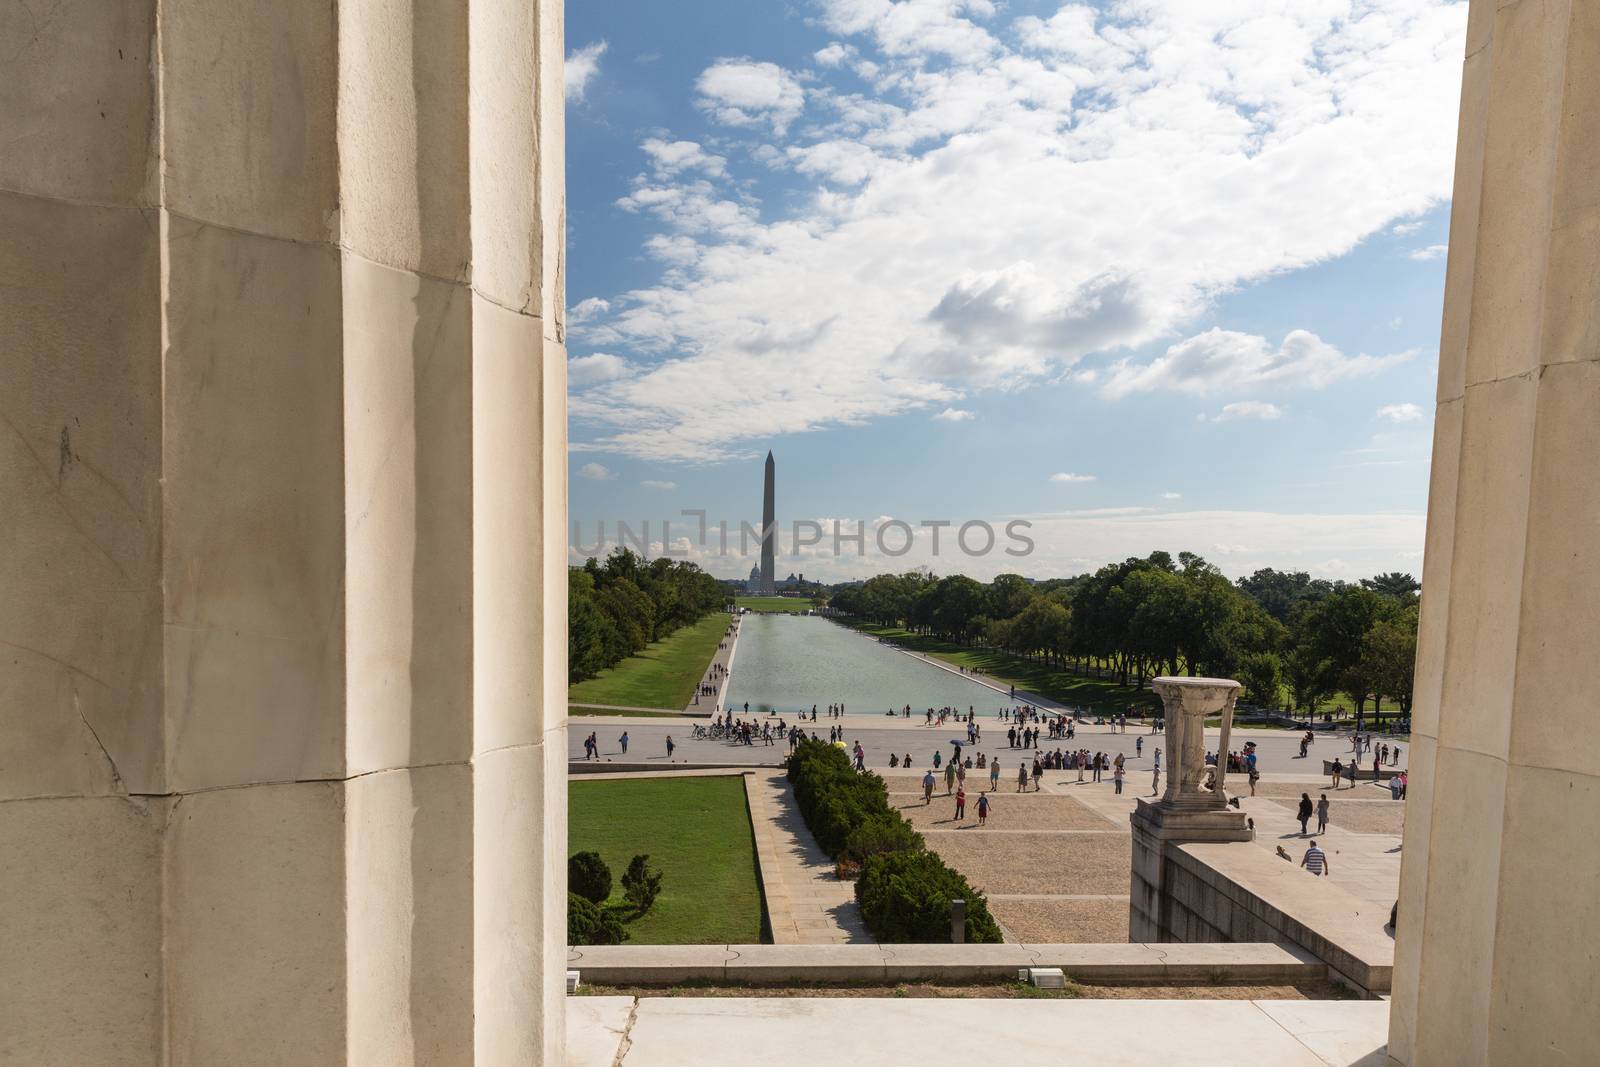 The view through the columns of the Lincoln Memorial to the Monument and the Capitol Building in Washington DC